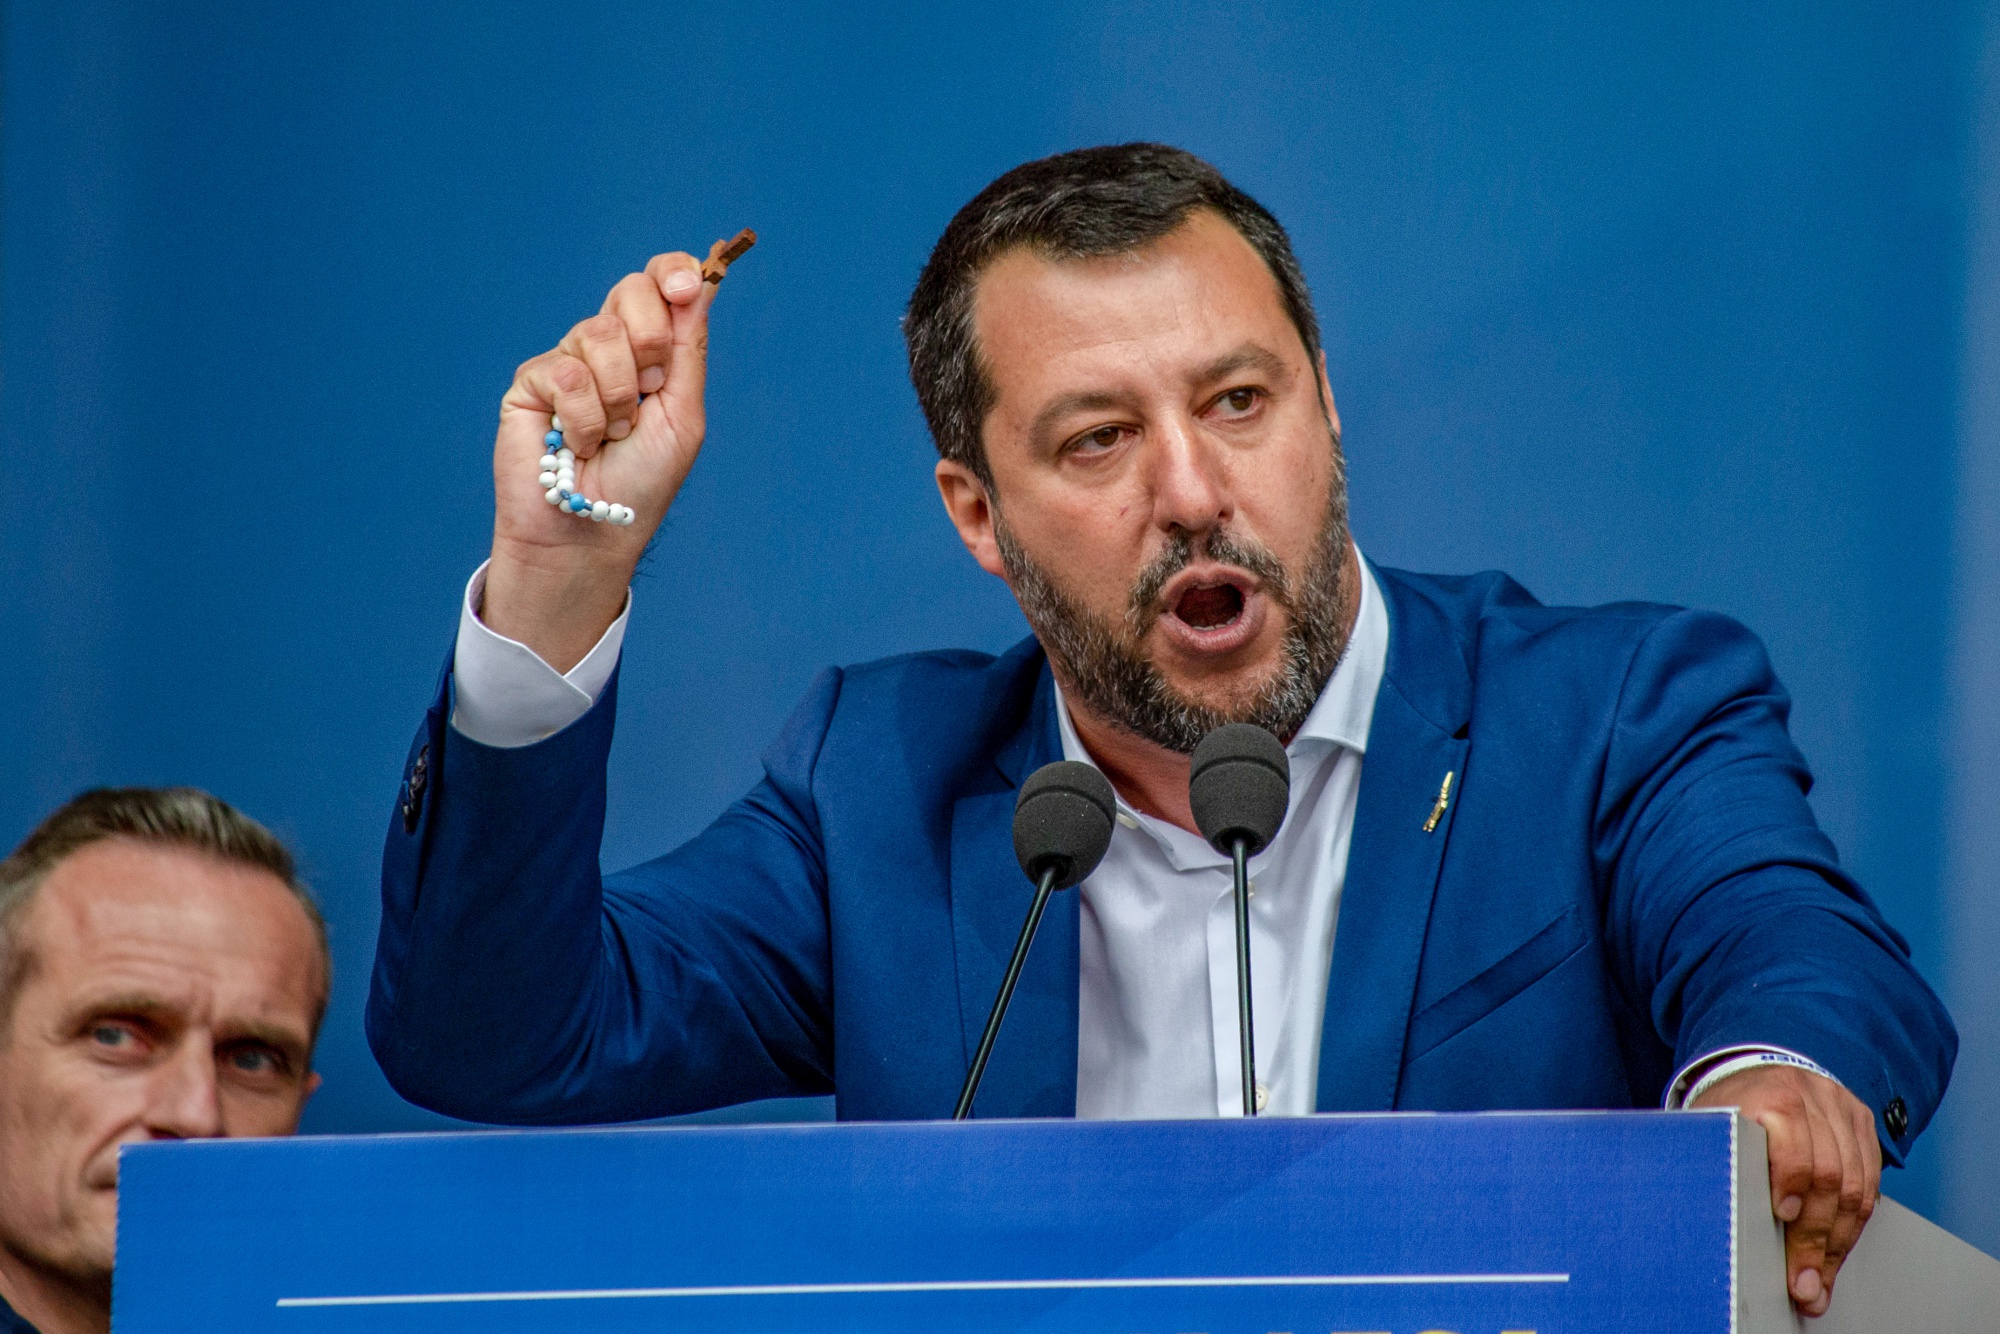 Italy’s Salvini Sparks Clash on Security as Election Nears - Bloomberg